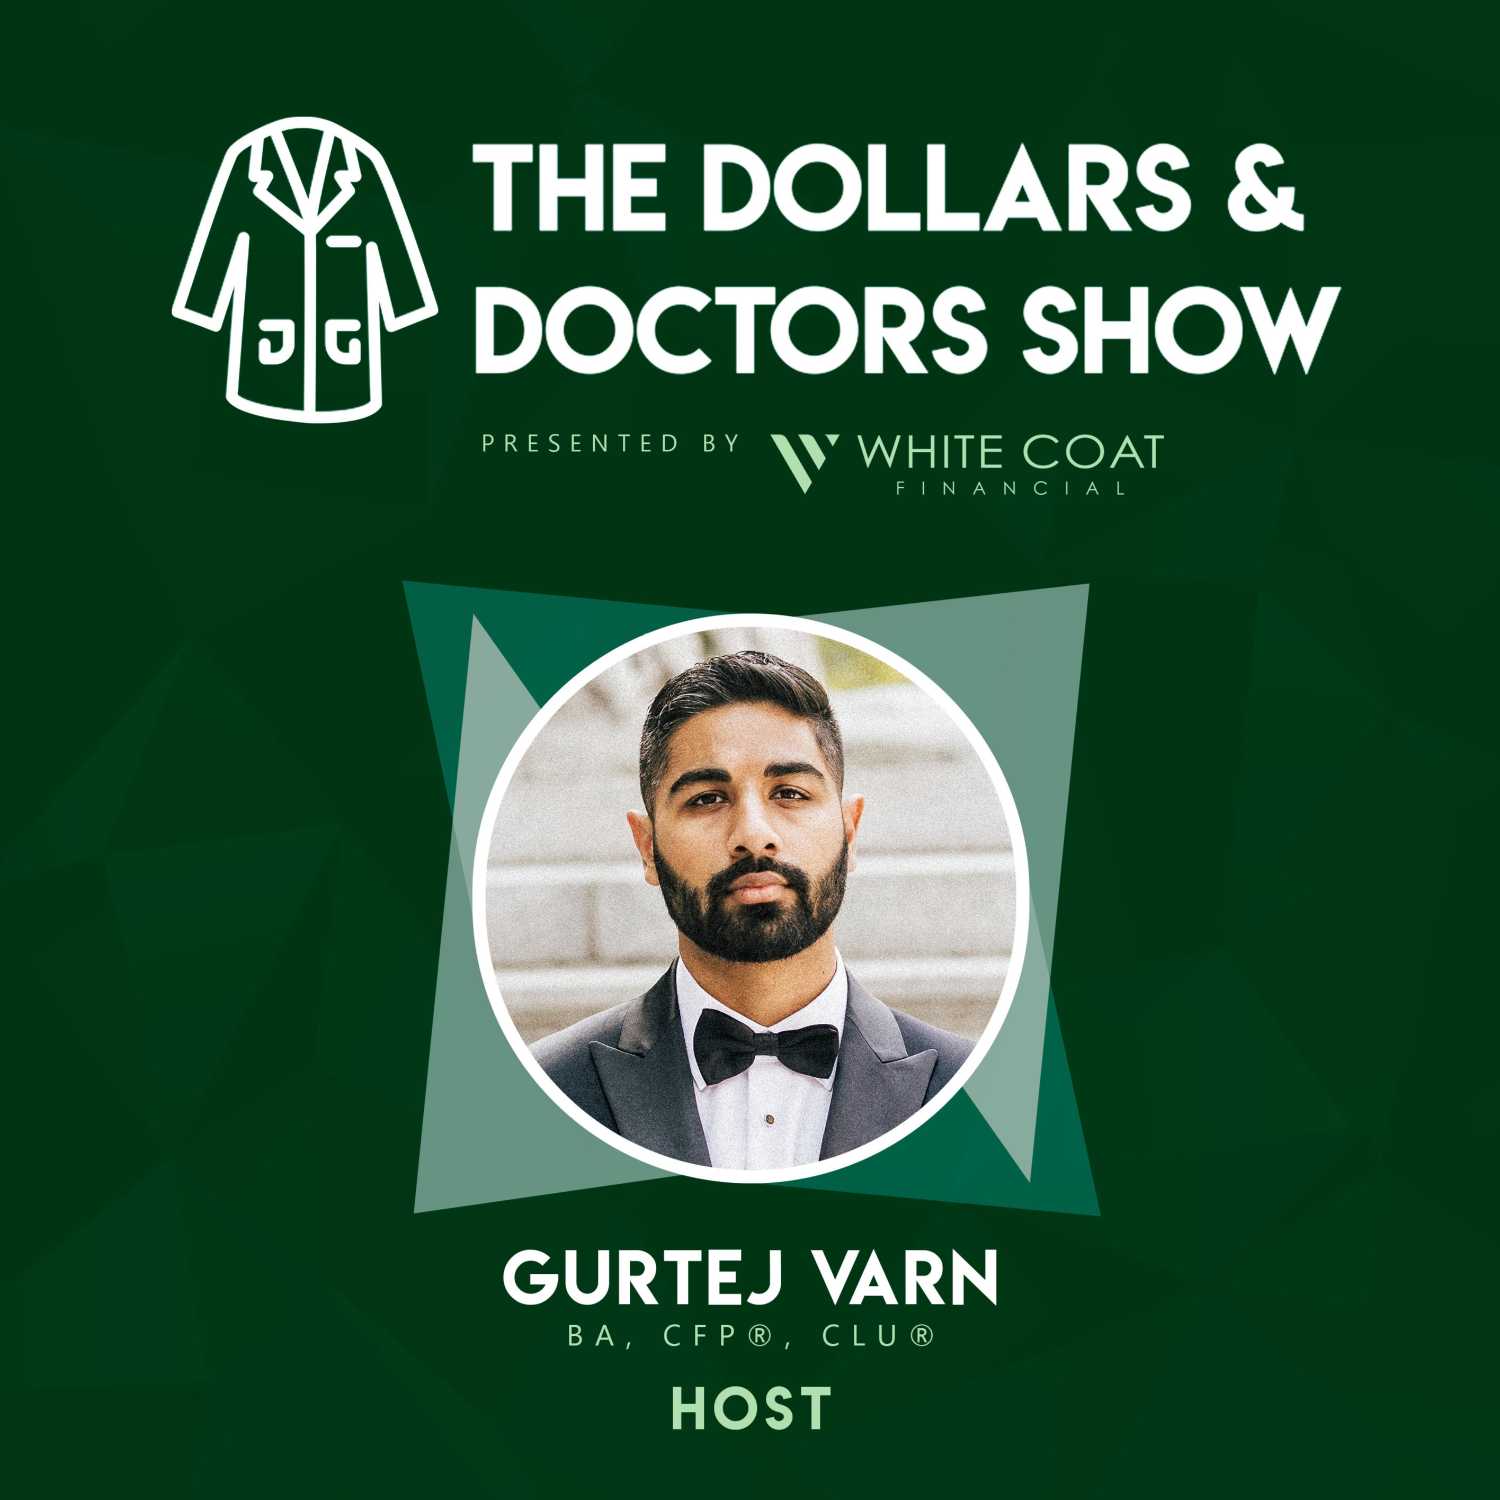 Episode 1: Introduction to The Dollars & Doctors Show and White Coat Financial